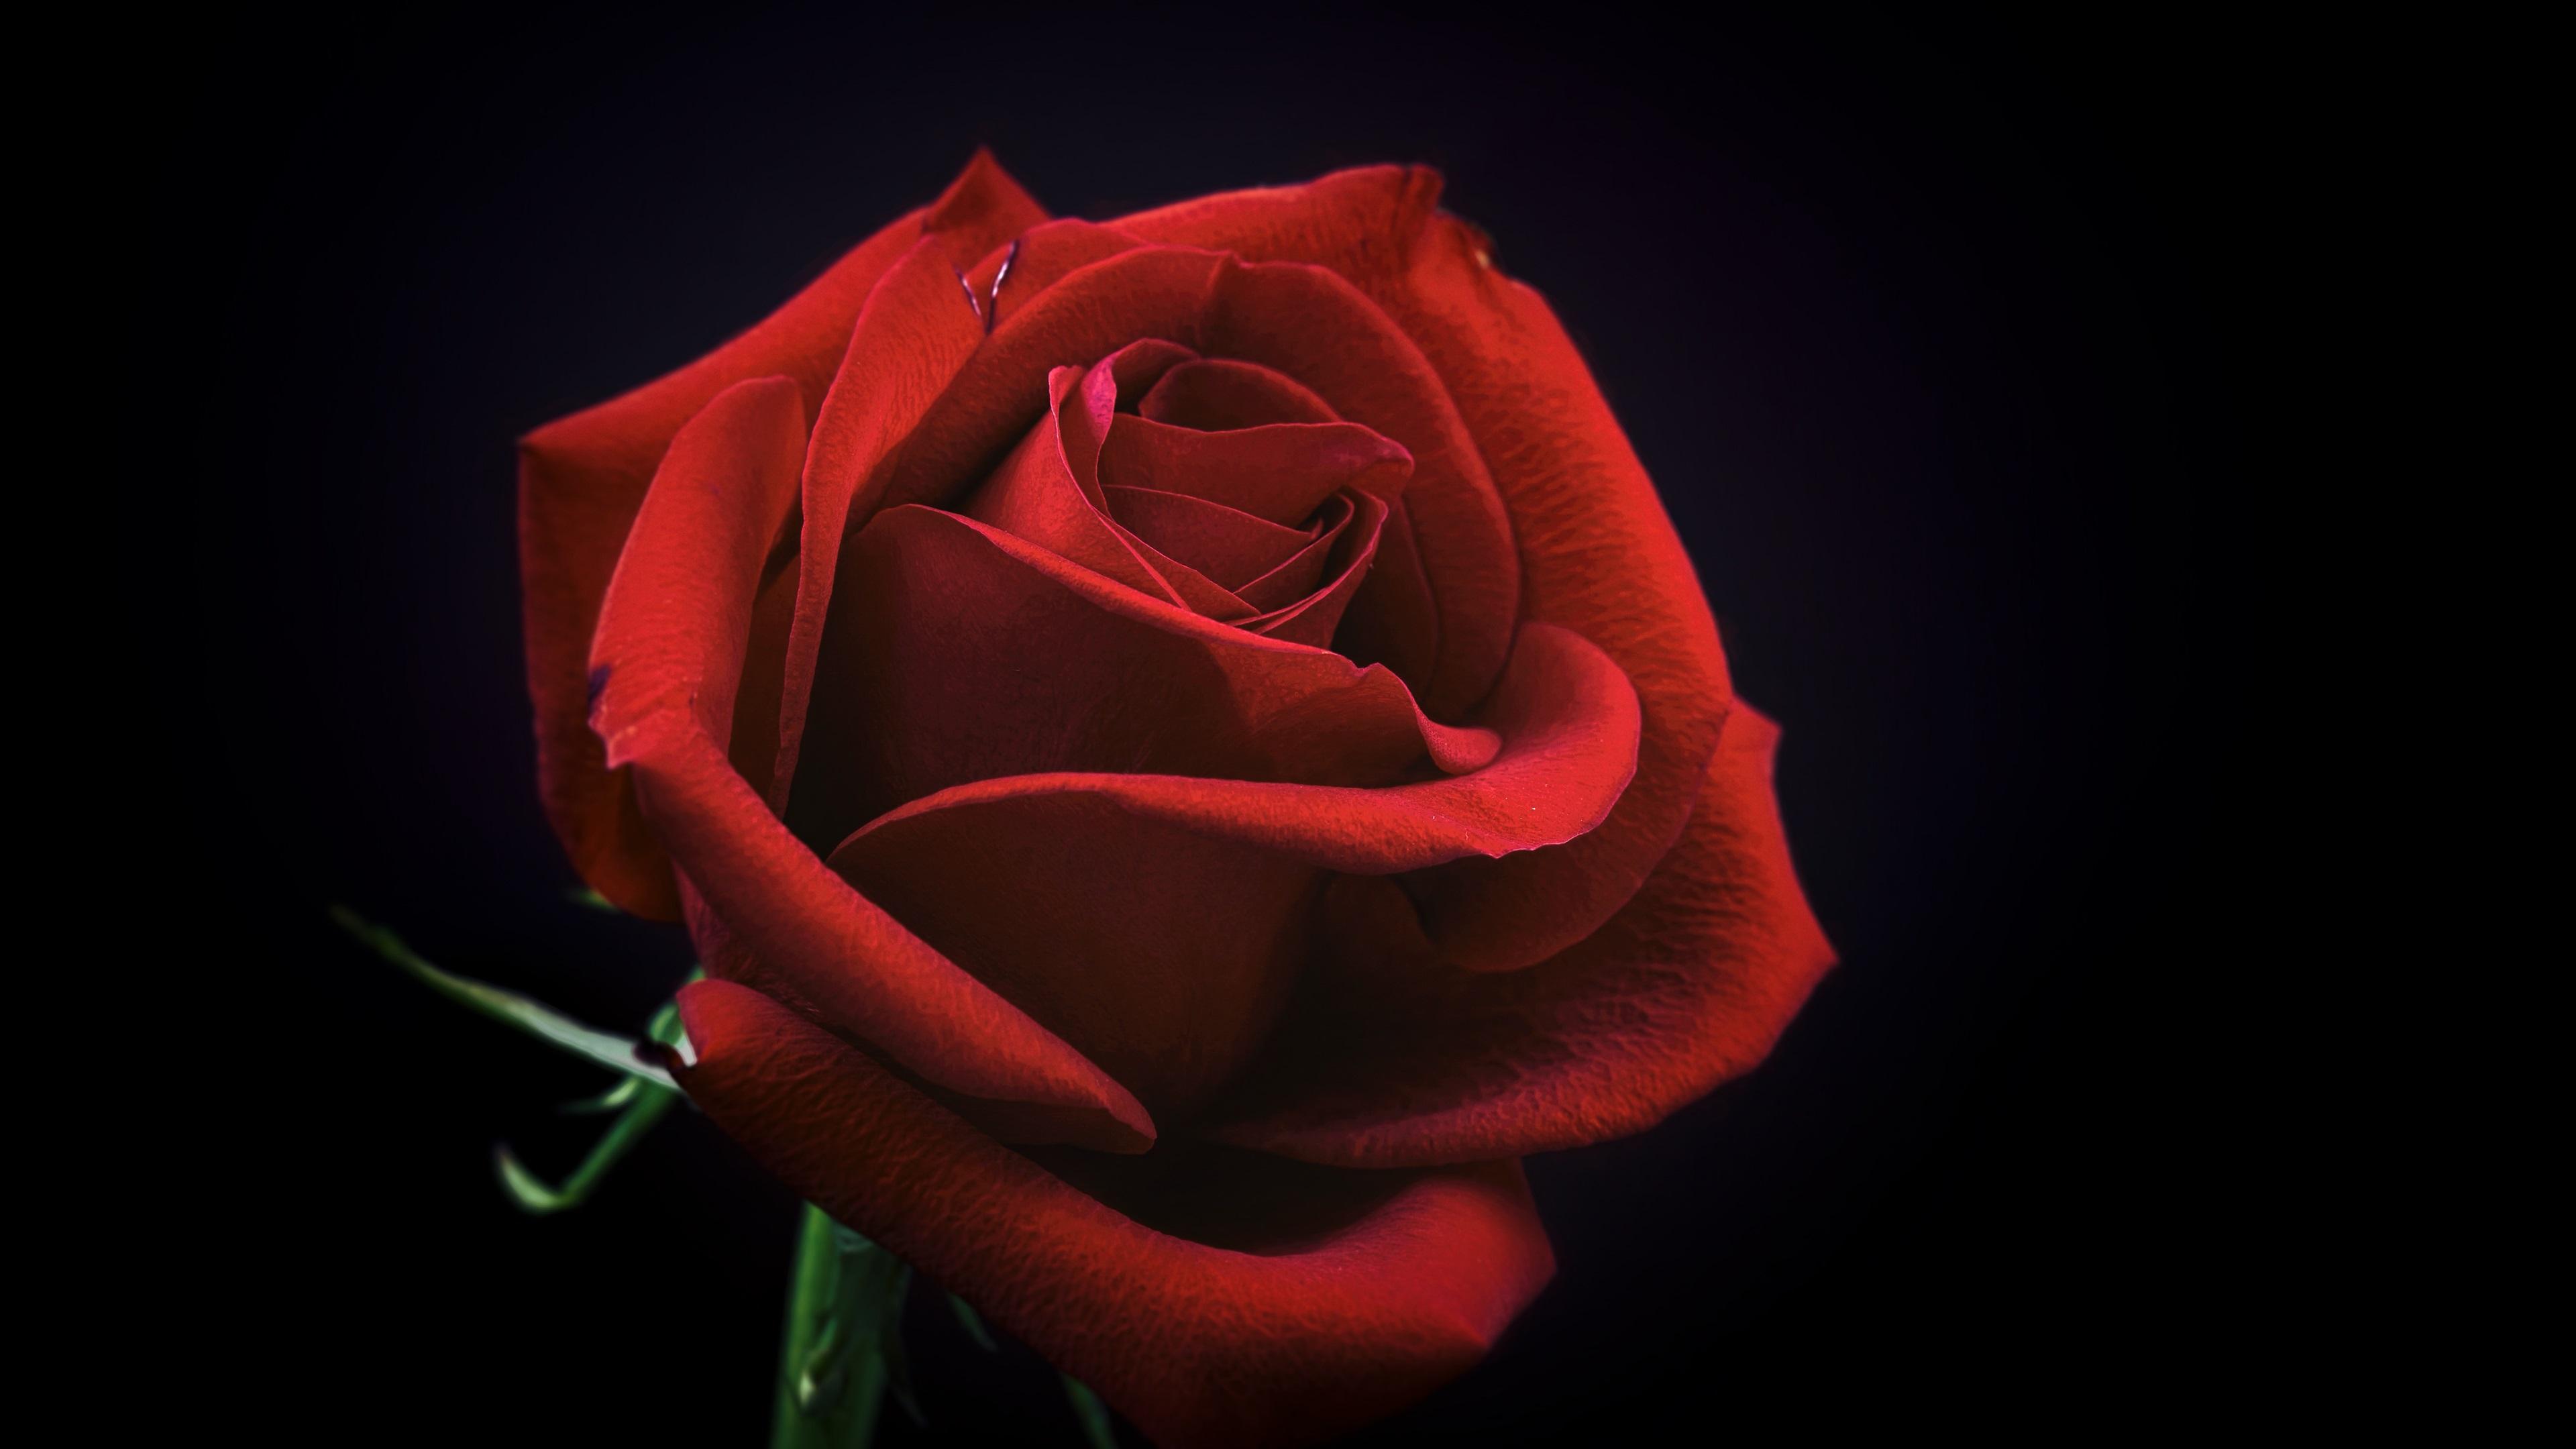 Red rose macro photography, black background 1080x1920